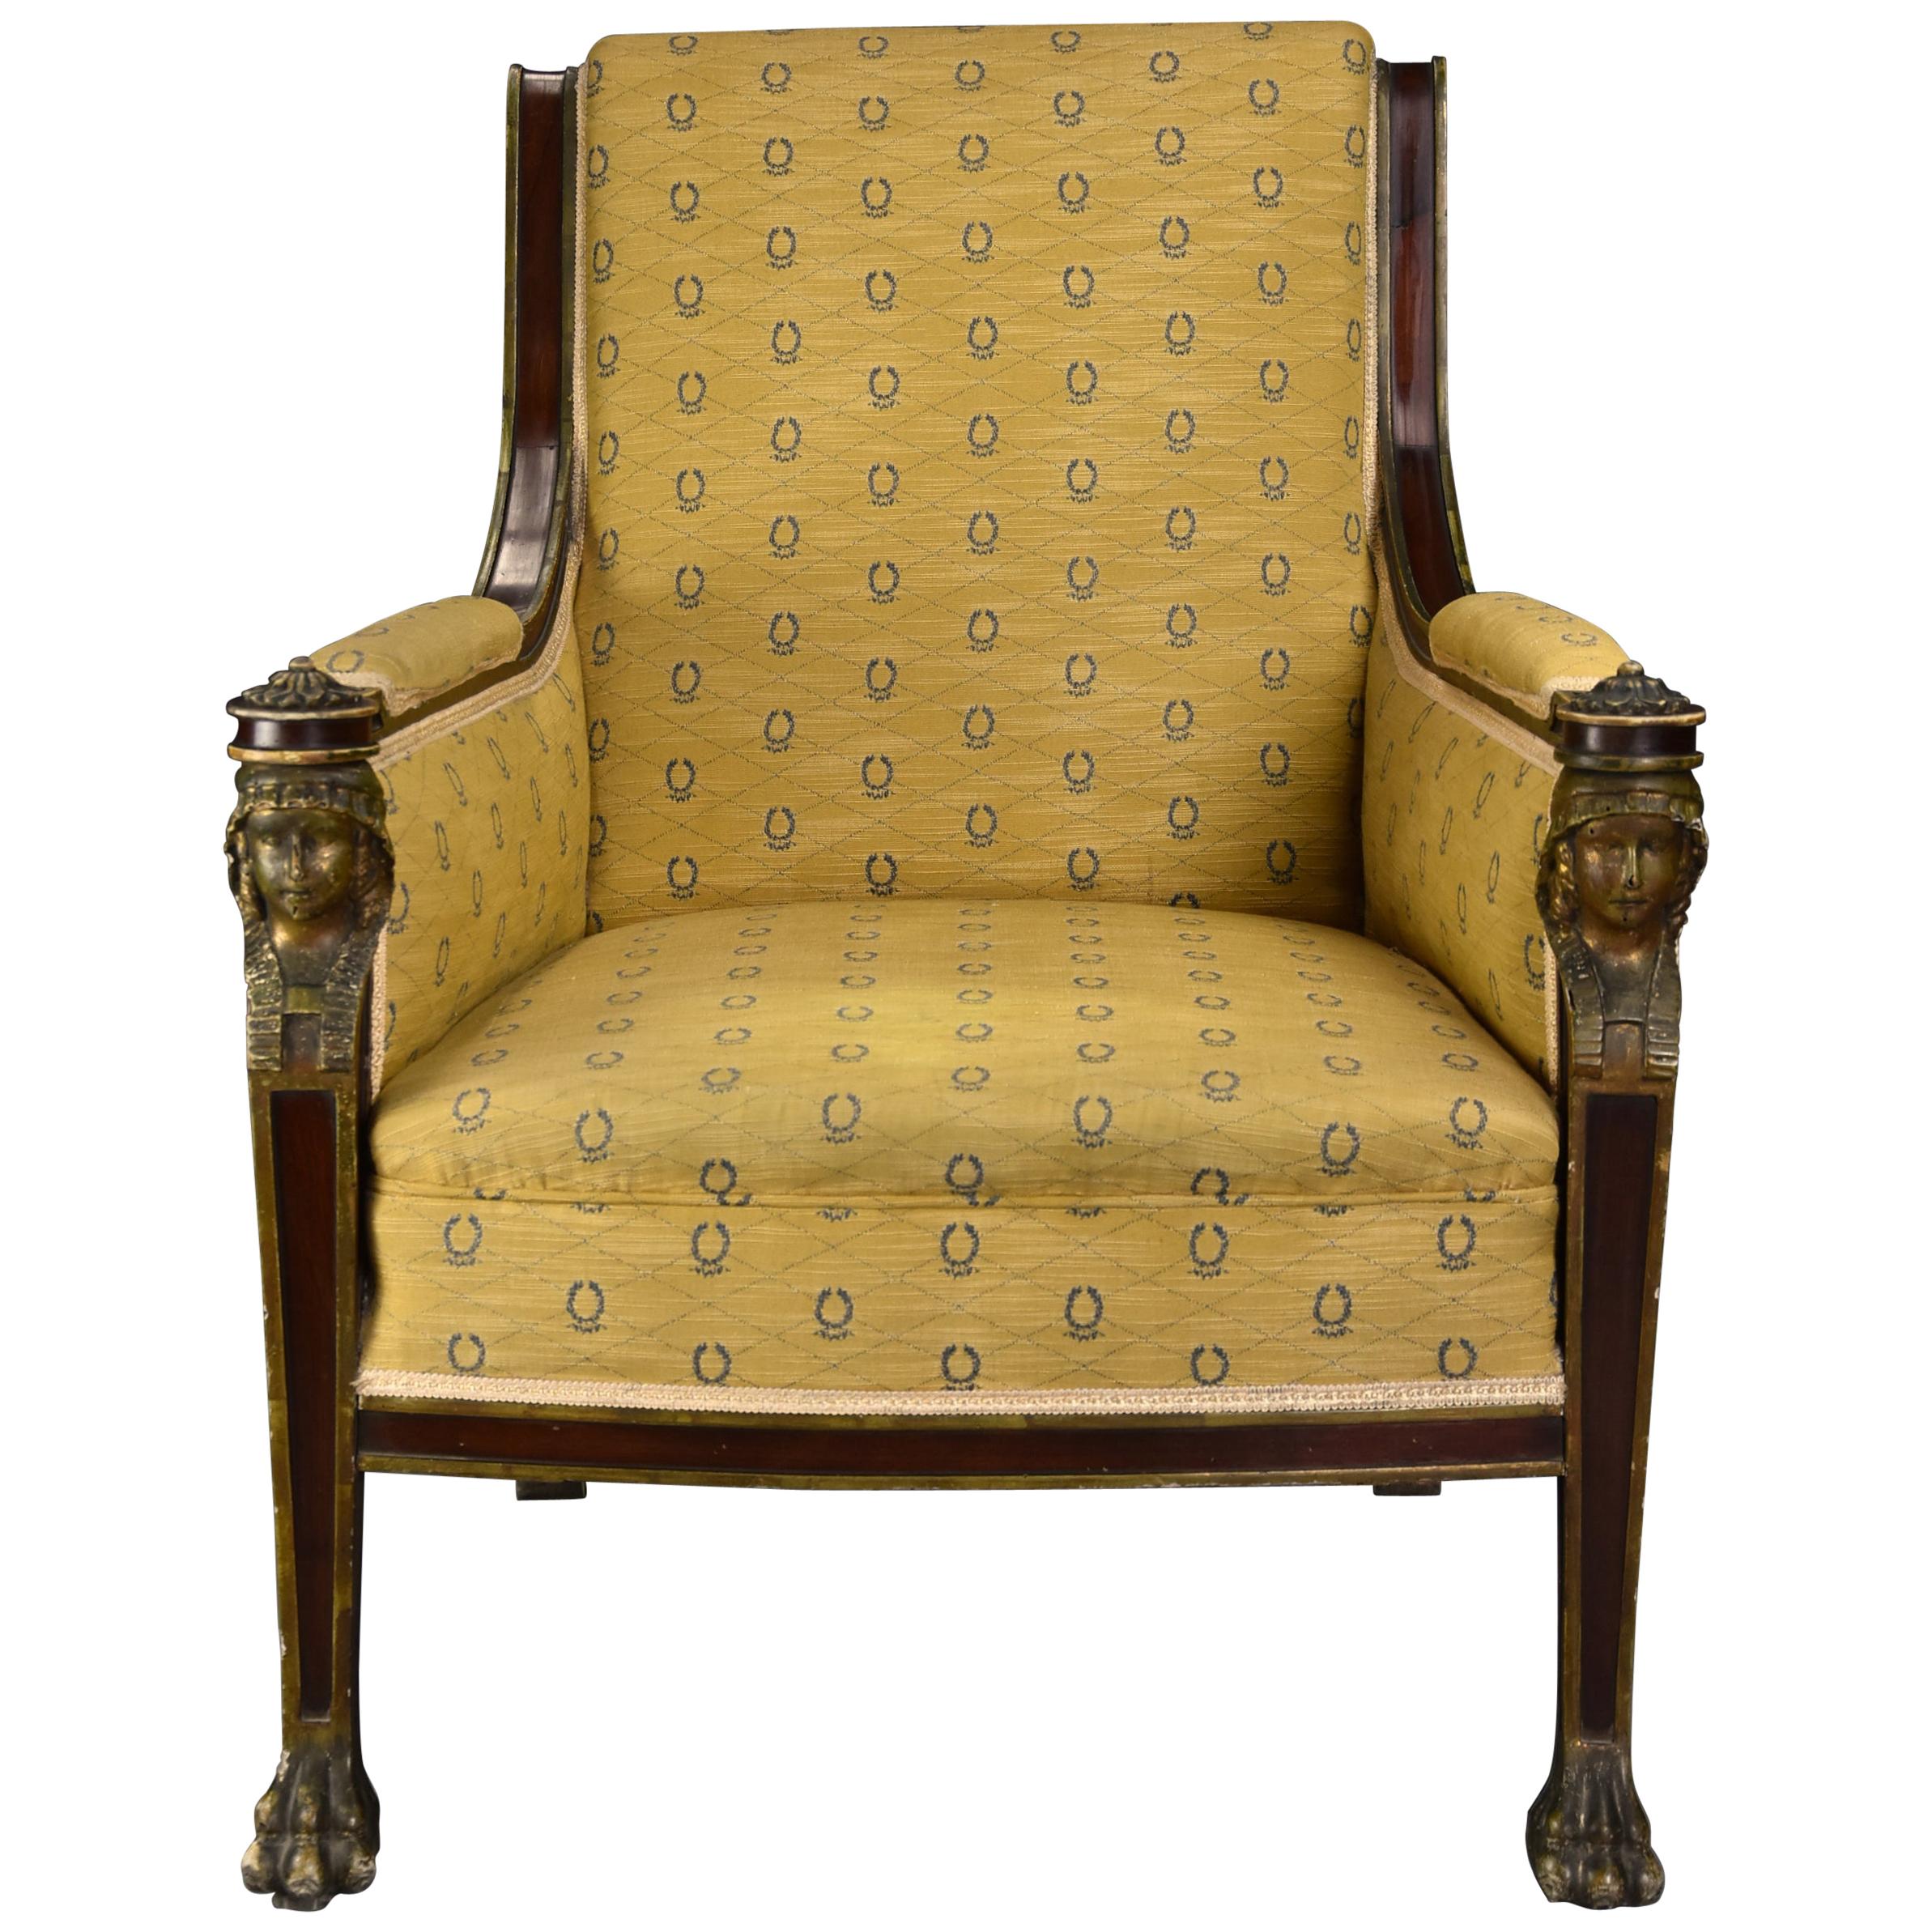 Highly Decorative Early 20th Century French Empire Style Mahogany Armchair For Sale